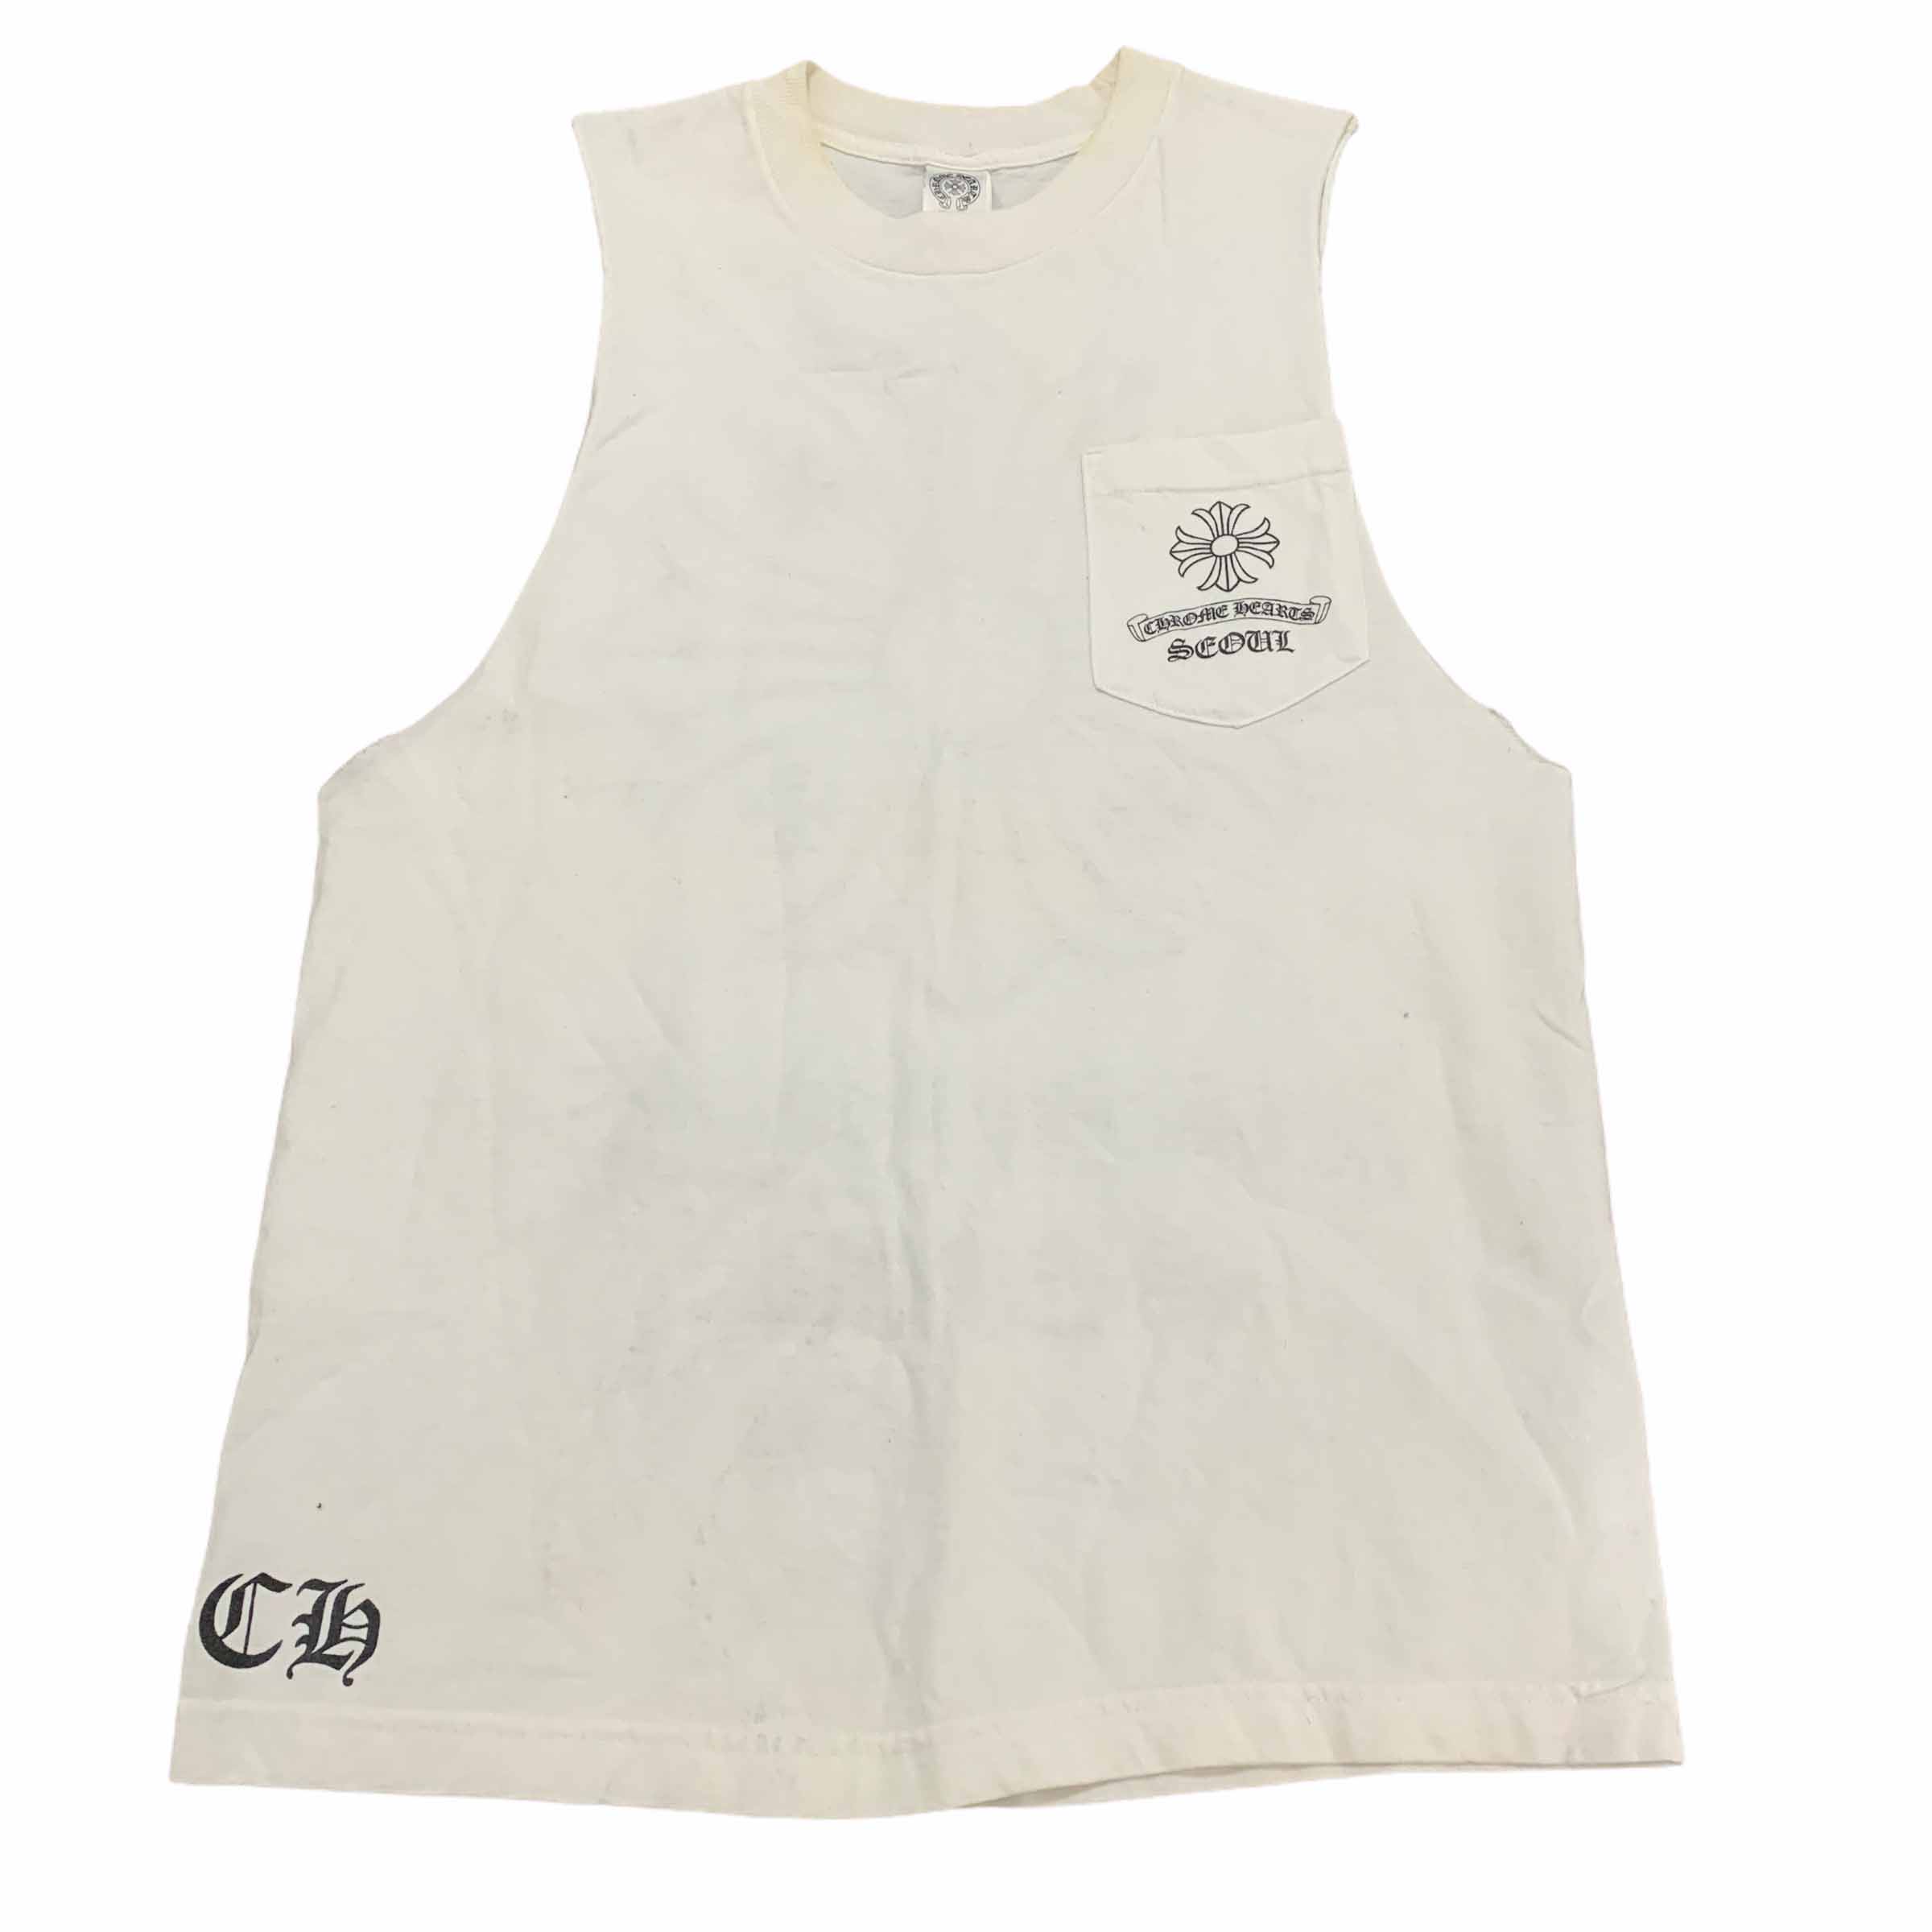 [Chrome hearts] Lettering Sleeveless WH - Size M